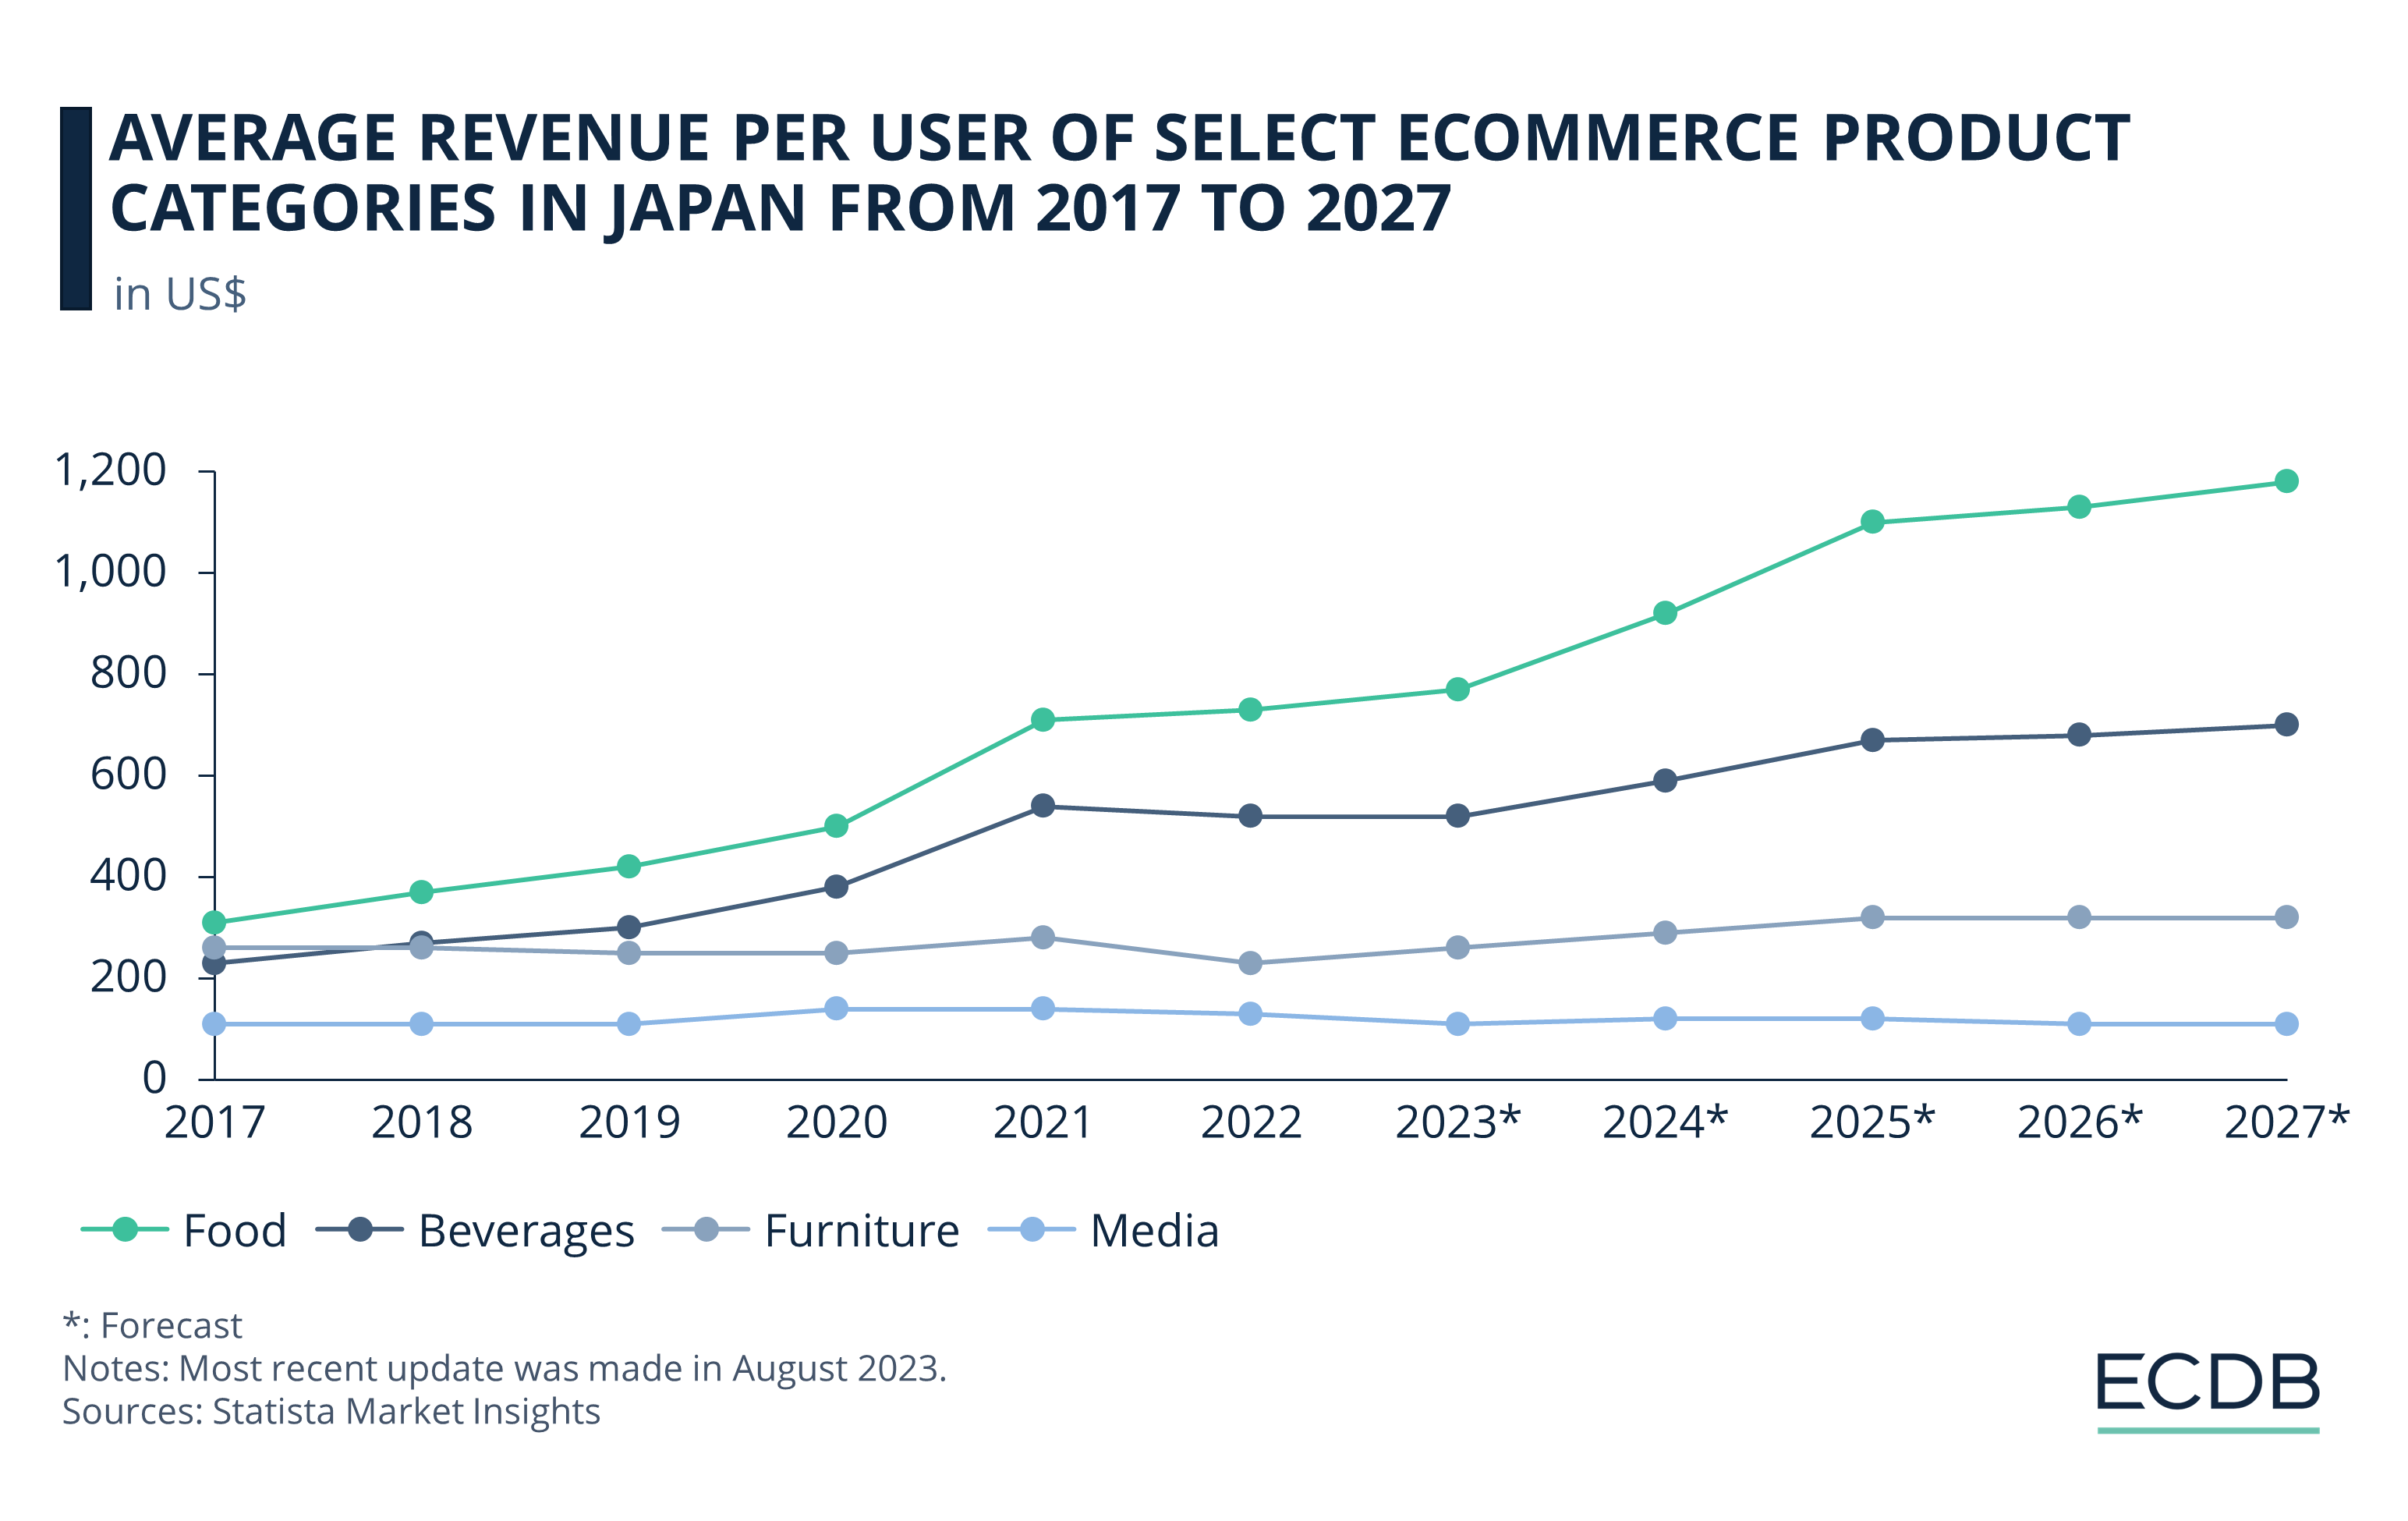 Average Revenue per User of Select eCommerce Product Categories in Japan from 2017 to 2027